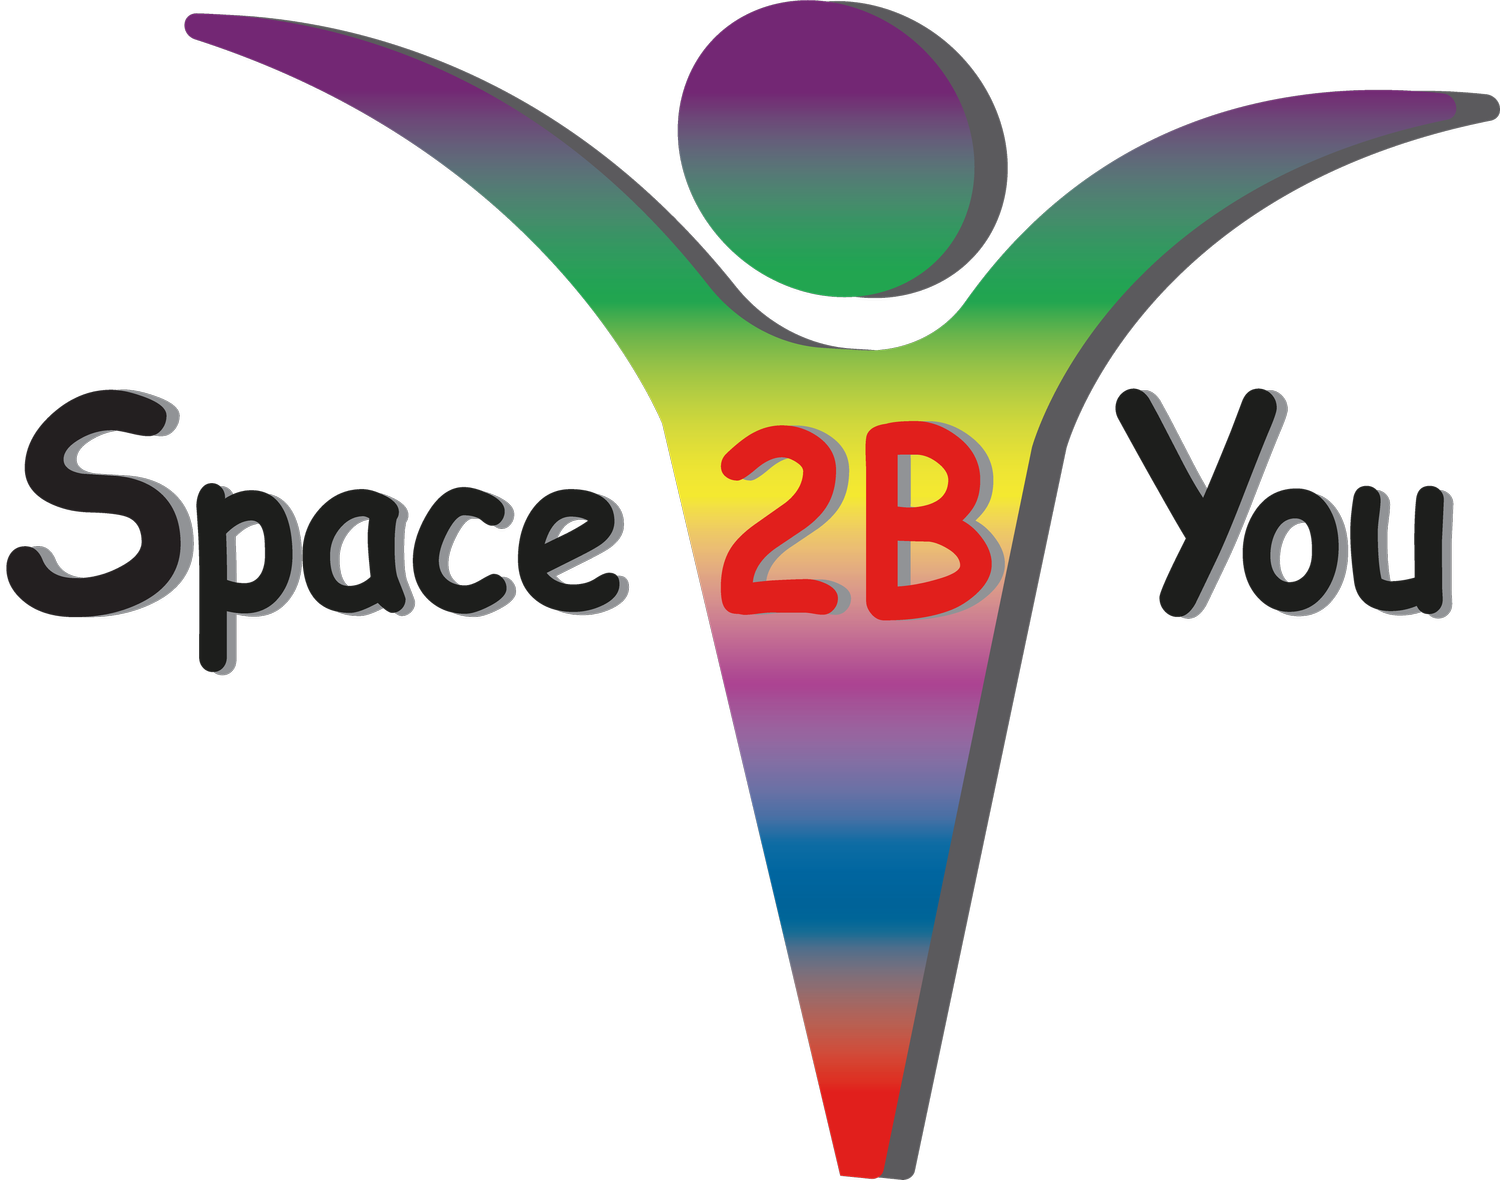 Space 2B You Mental Health Services